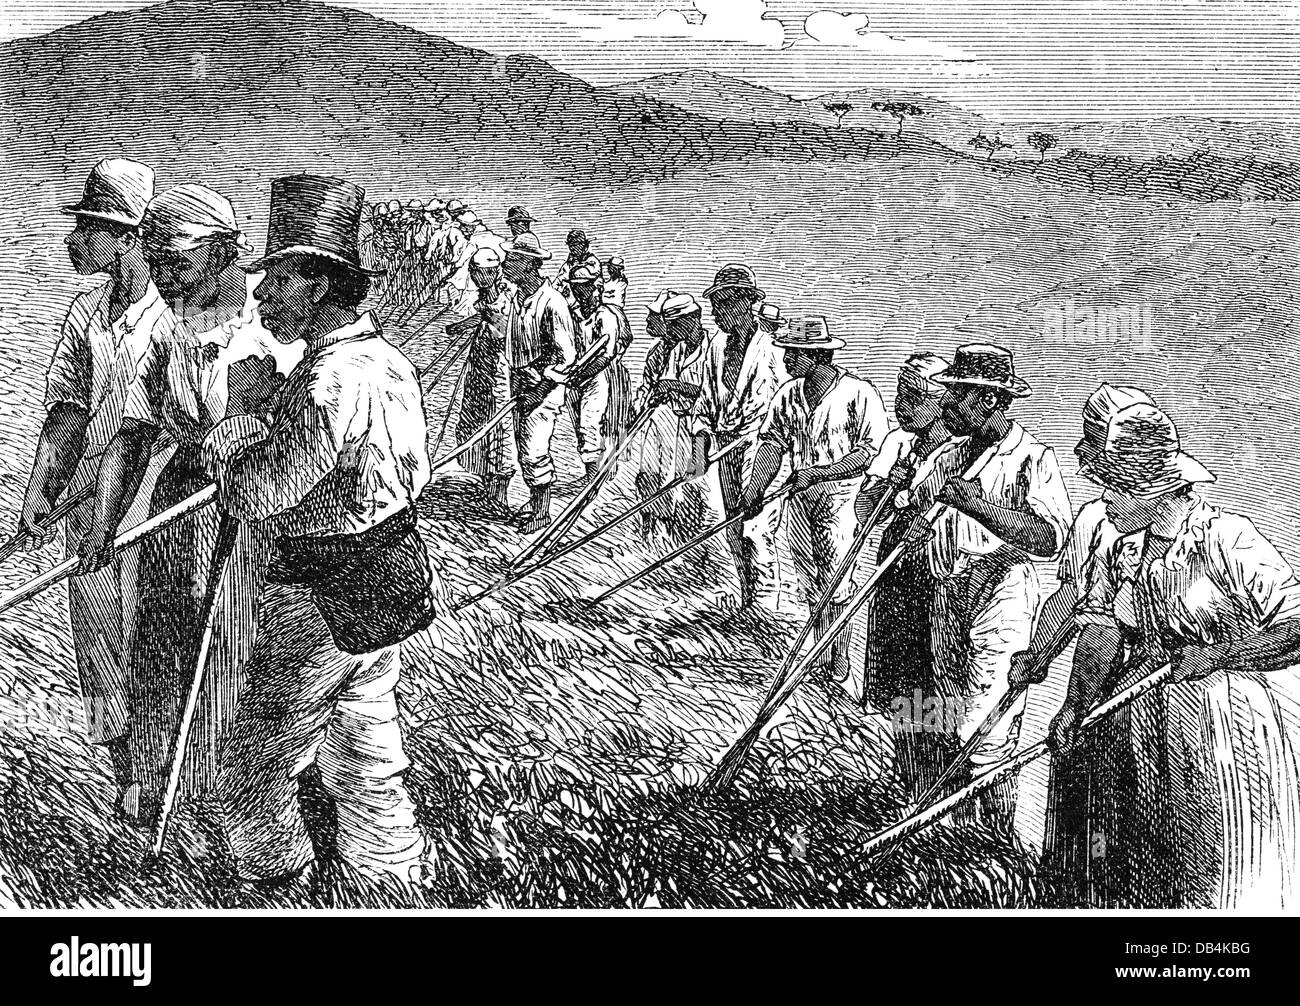 slavery, slaves at work on a field in Brazil, wood engraving, 2nd half 19th century, coloured, colored, slave, suppression, suppressions, agriculture, farming, field work, fieldwork, people, workers, worker, men, man, women, America, South America, historic, historical, Additional-Rights-Clearences-Not Available Stock Photo